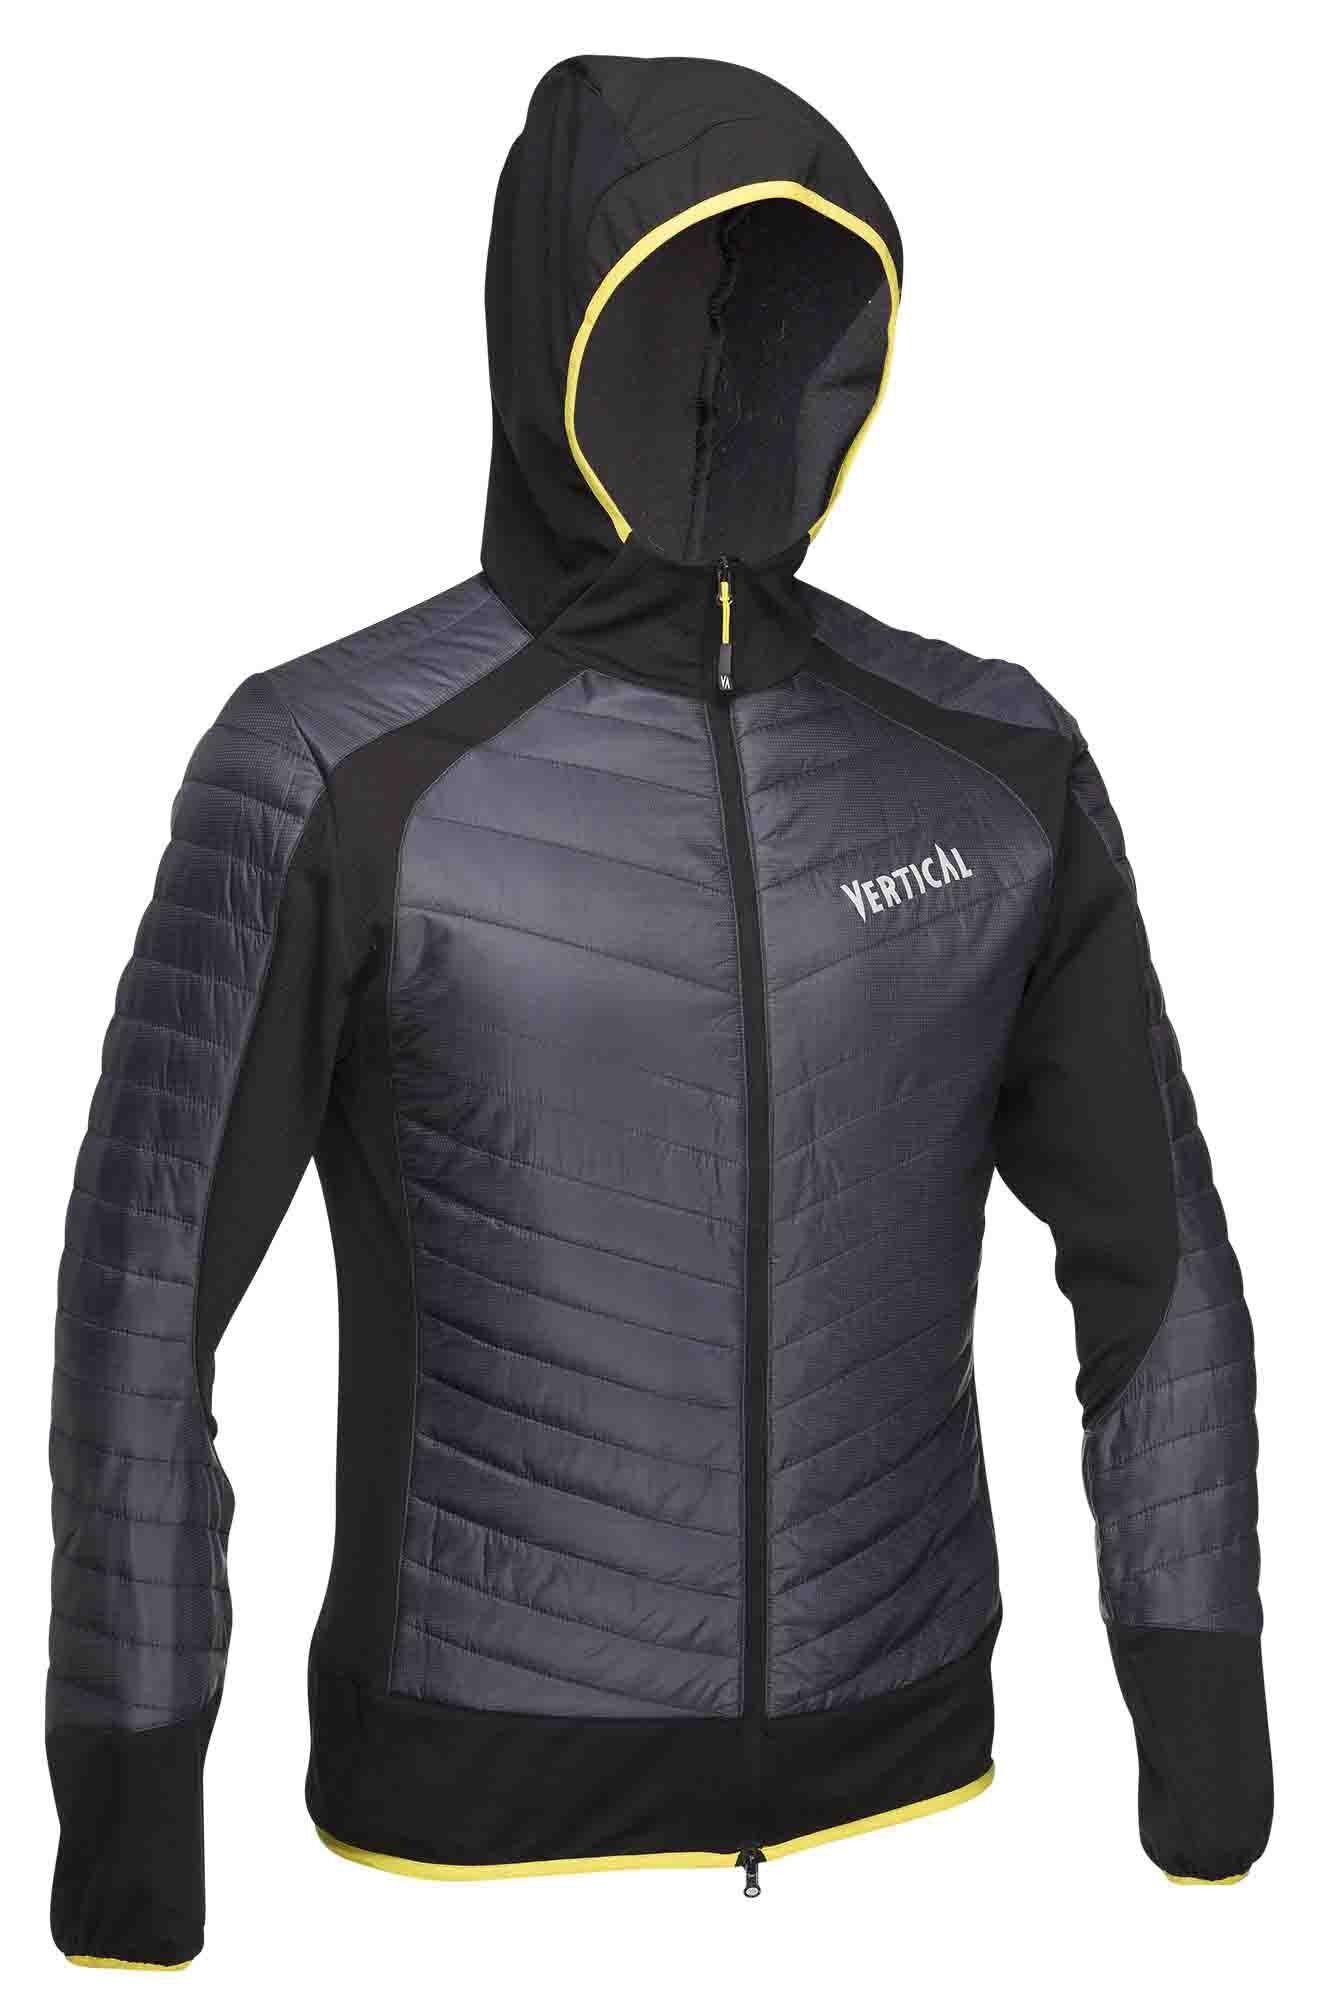 Vertical Aeroquest Hybrid Jacket - Giacca invernale - Uomo